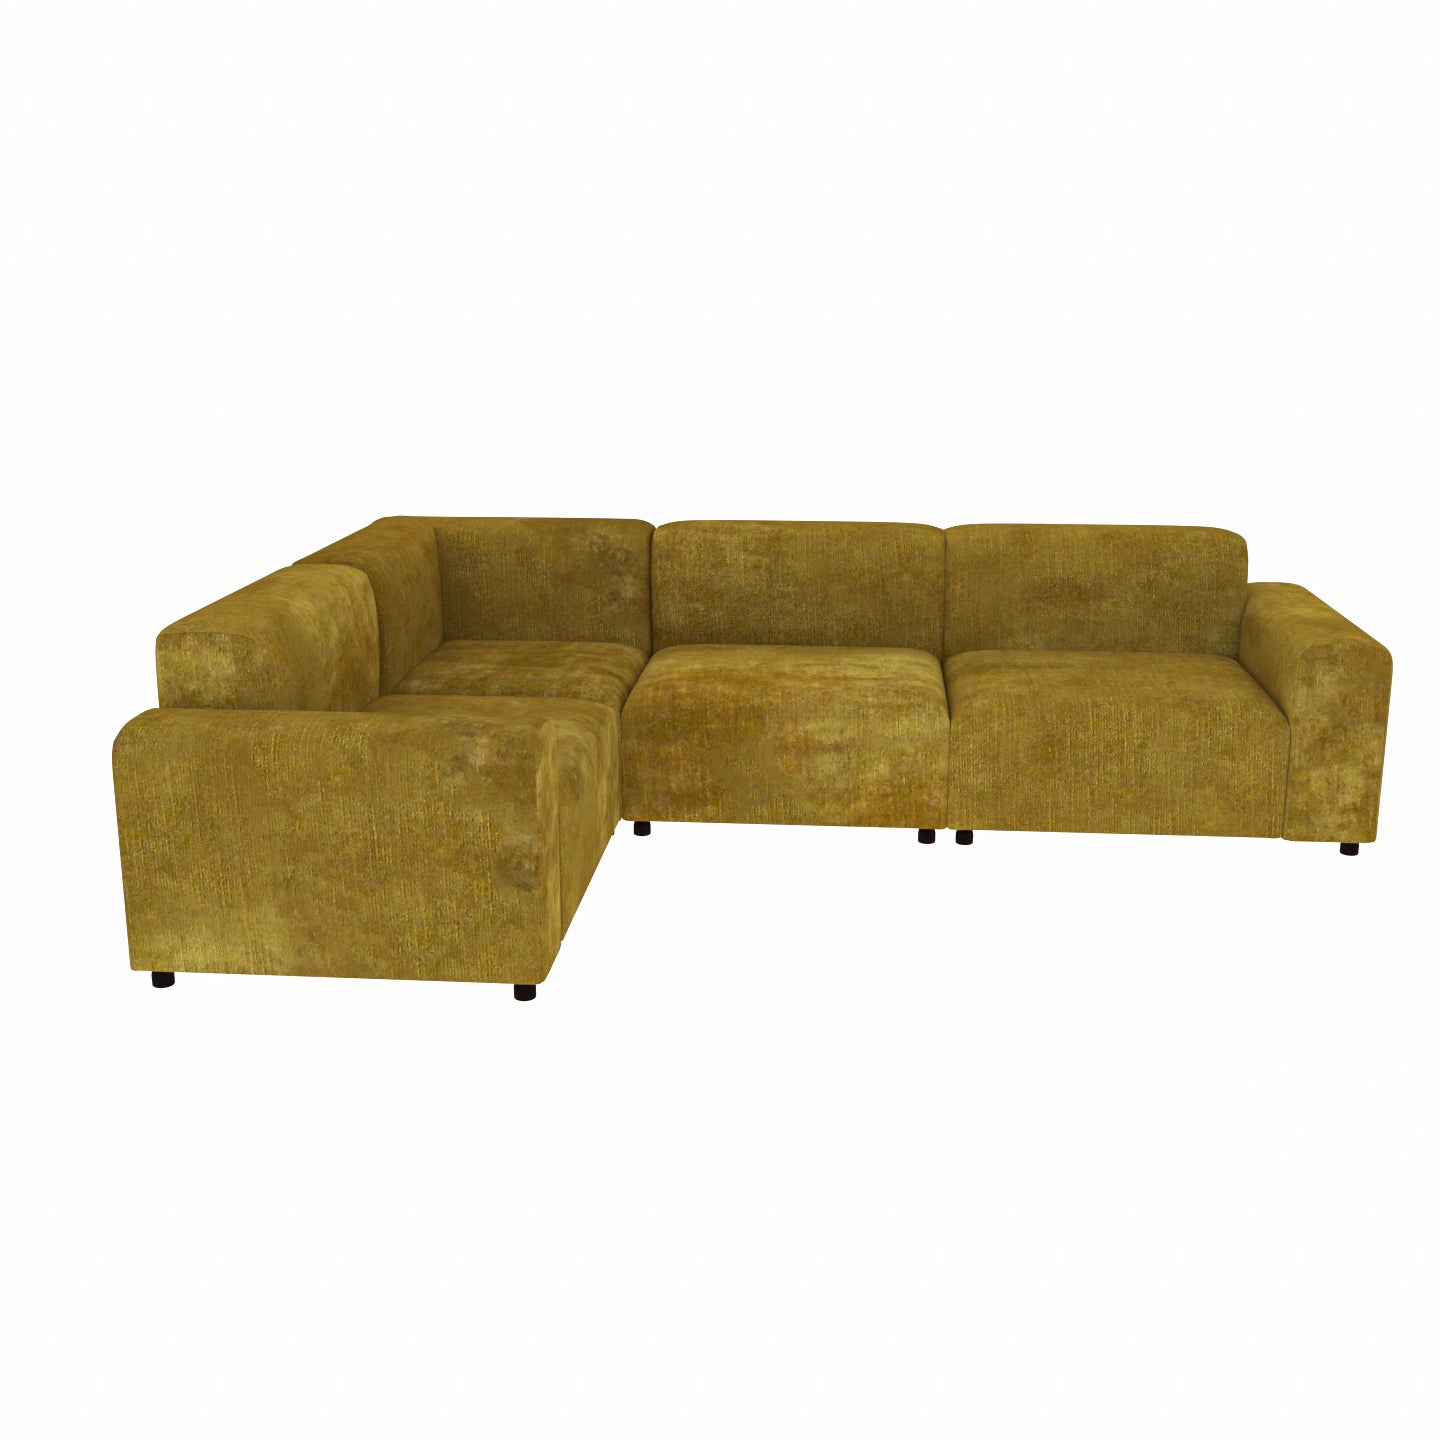 Rustic Pearl Pastel Coloured with Premium Comfort L Shaped 4 Seater Sofa Set for Home Sofa